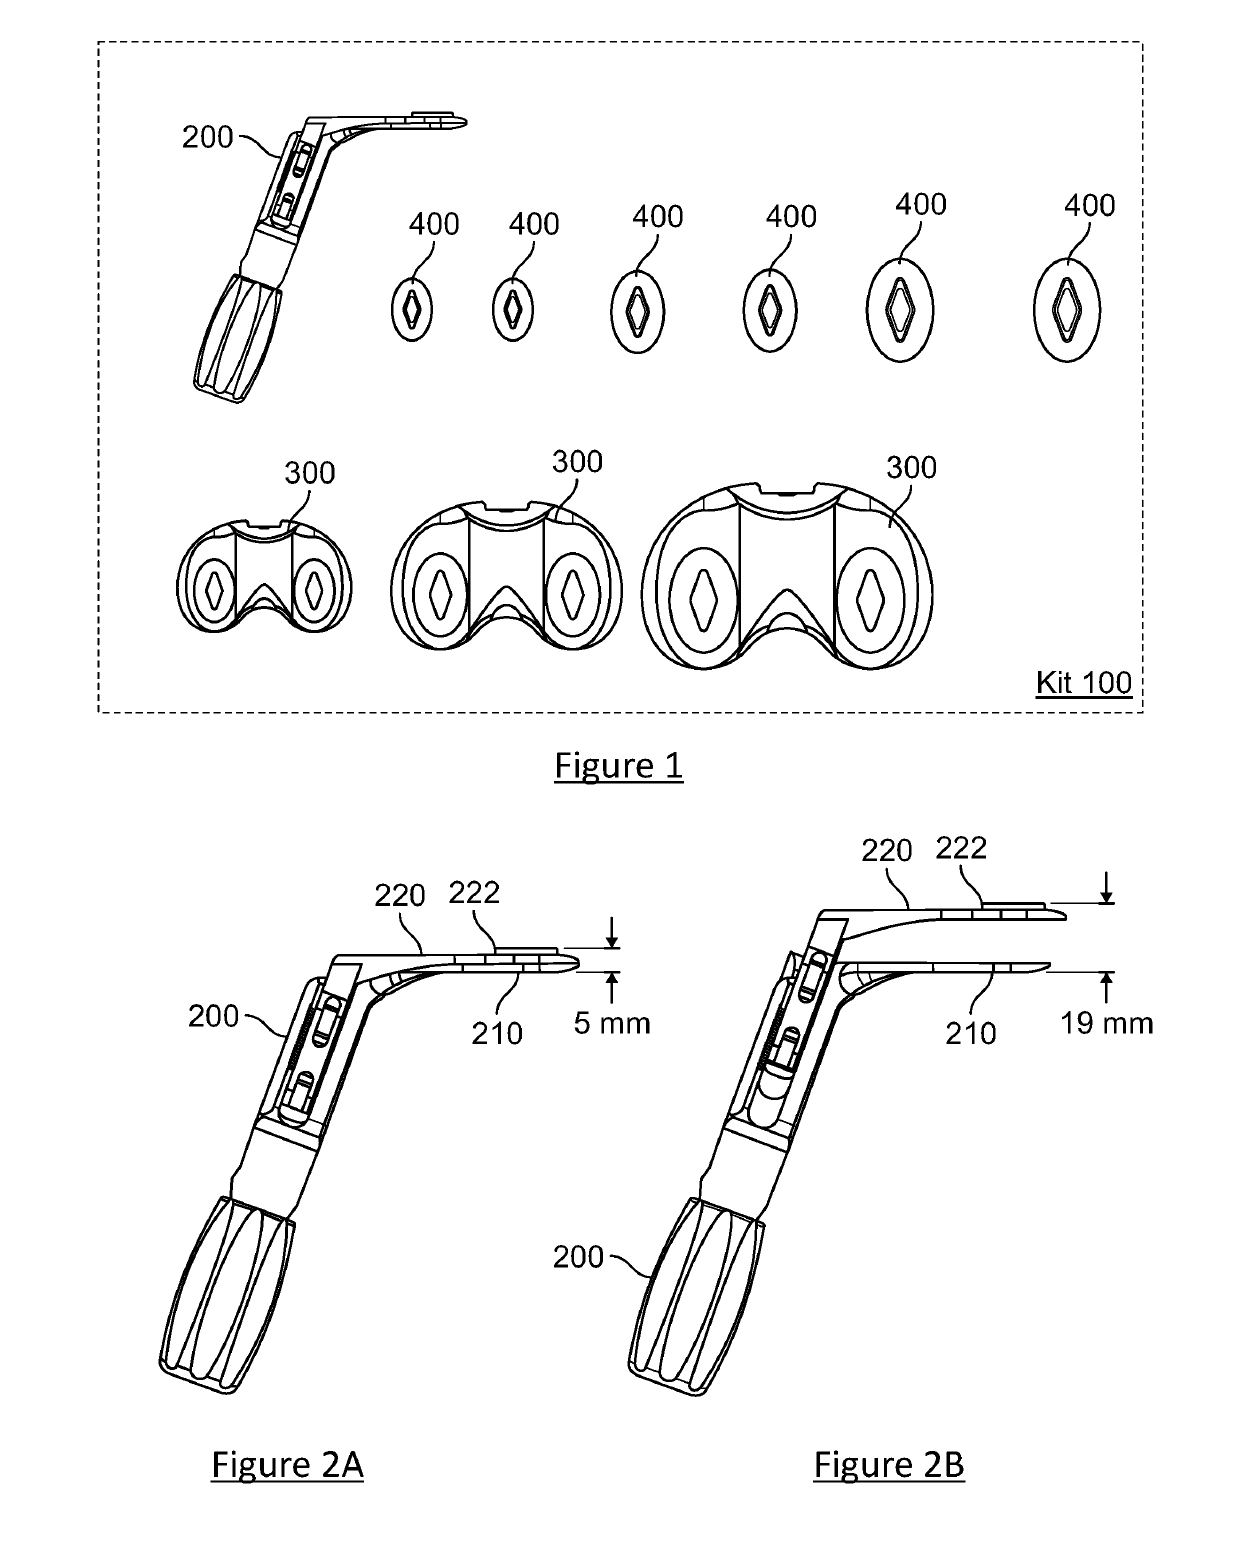 Devices and methods to prevent joint instability following arthroplasty